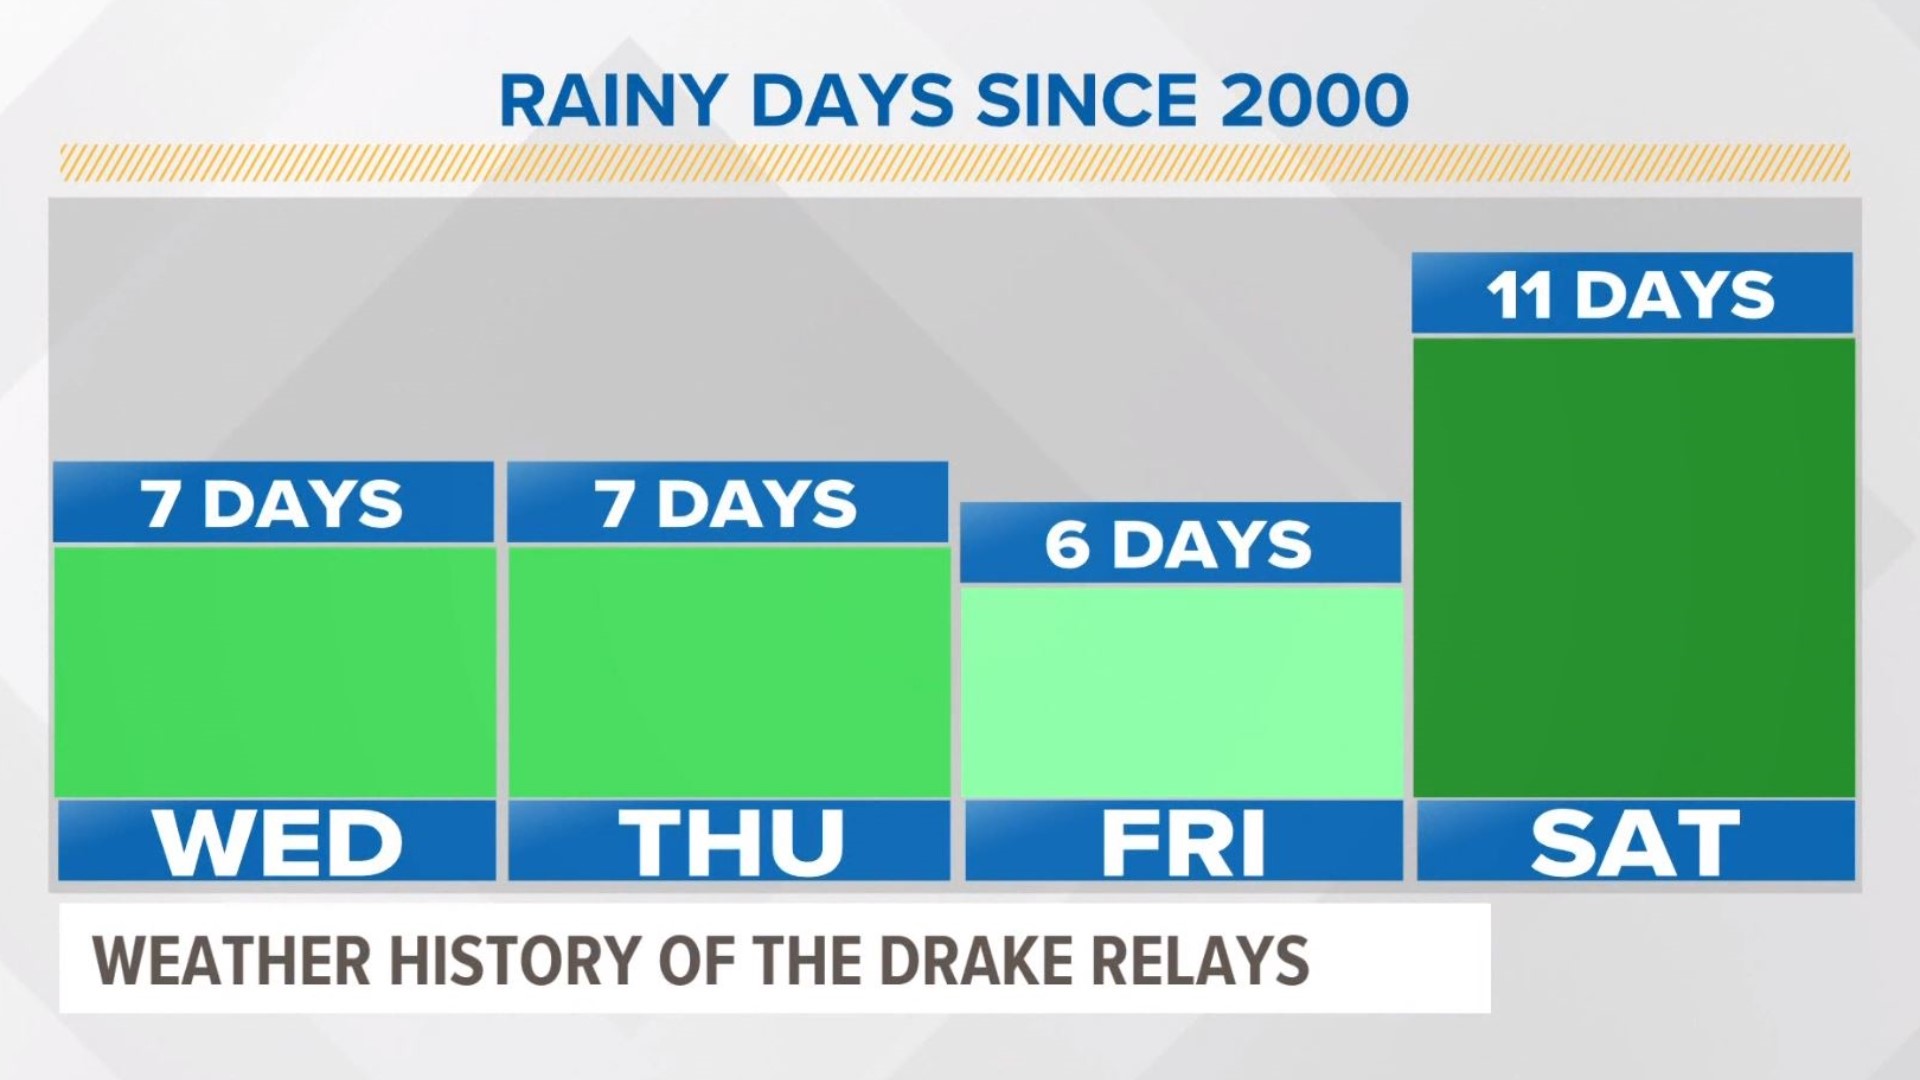 Since 2000, 18 out of the 21 competitions have seen some rain on at least one day of the Relays.